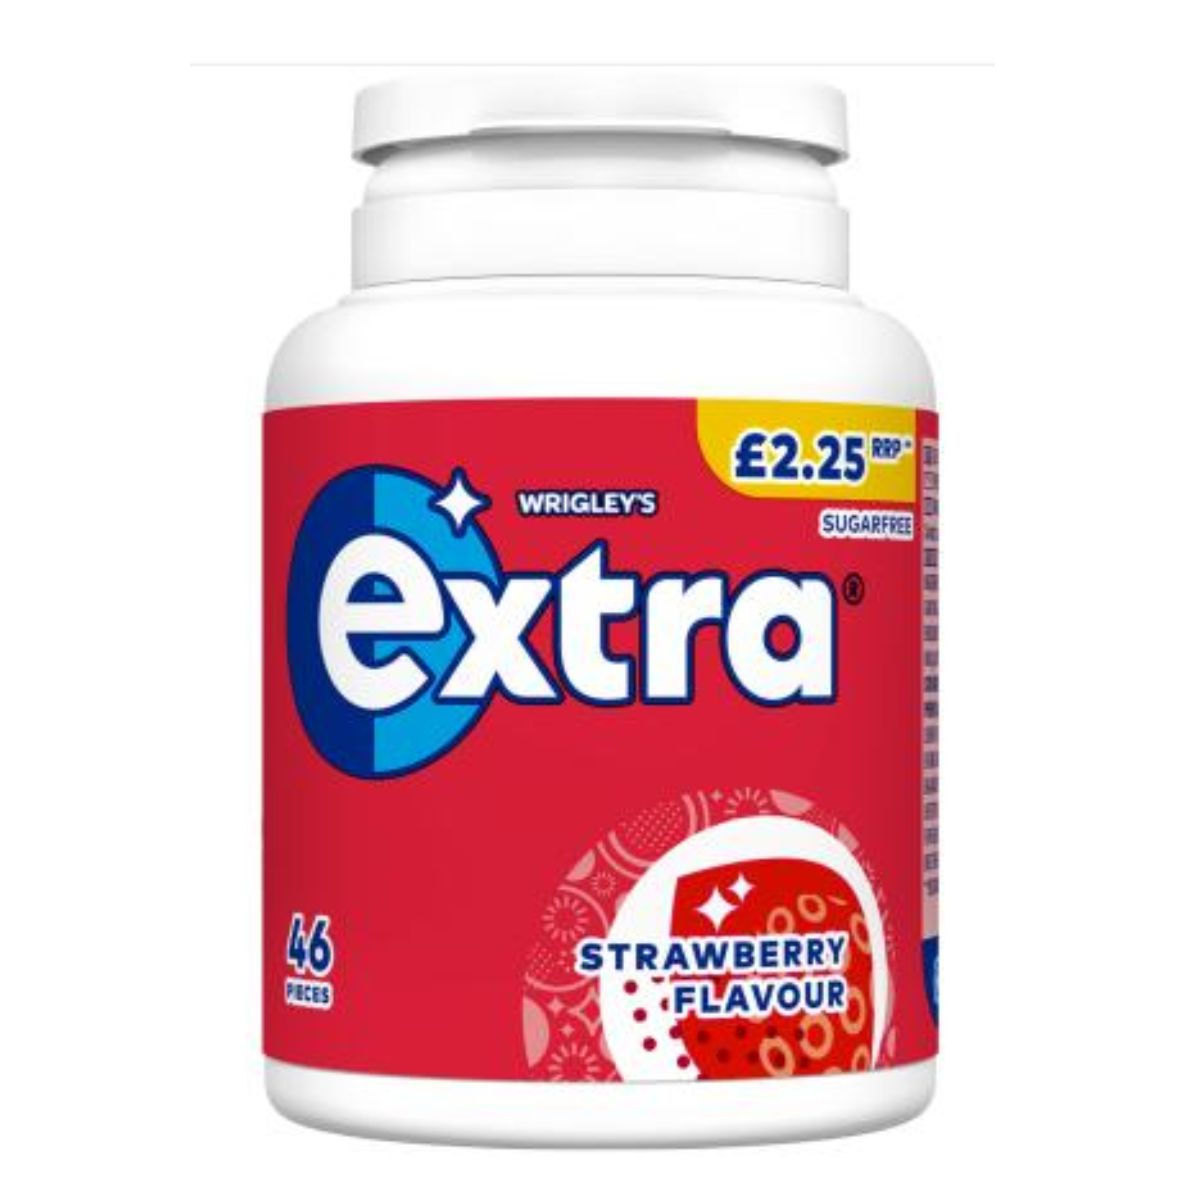 A bottle of Extra - Strawberry Flavour Sugarfree Chewing Gum Bottle - 46pcs.